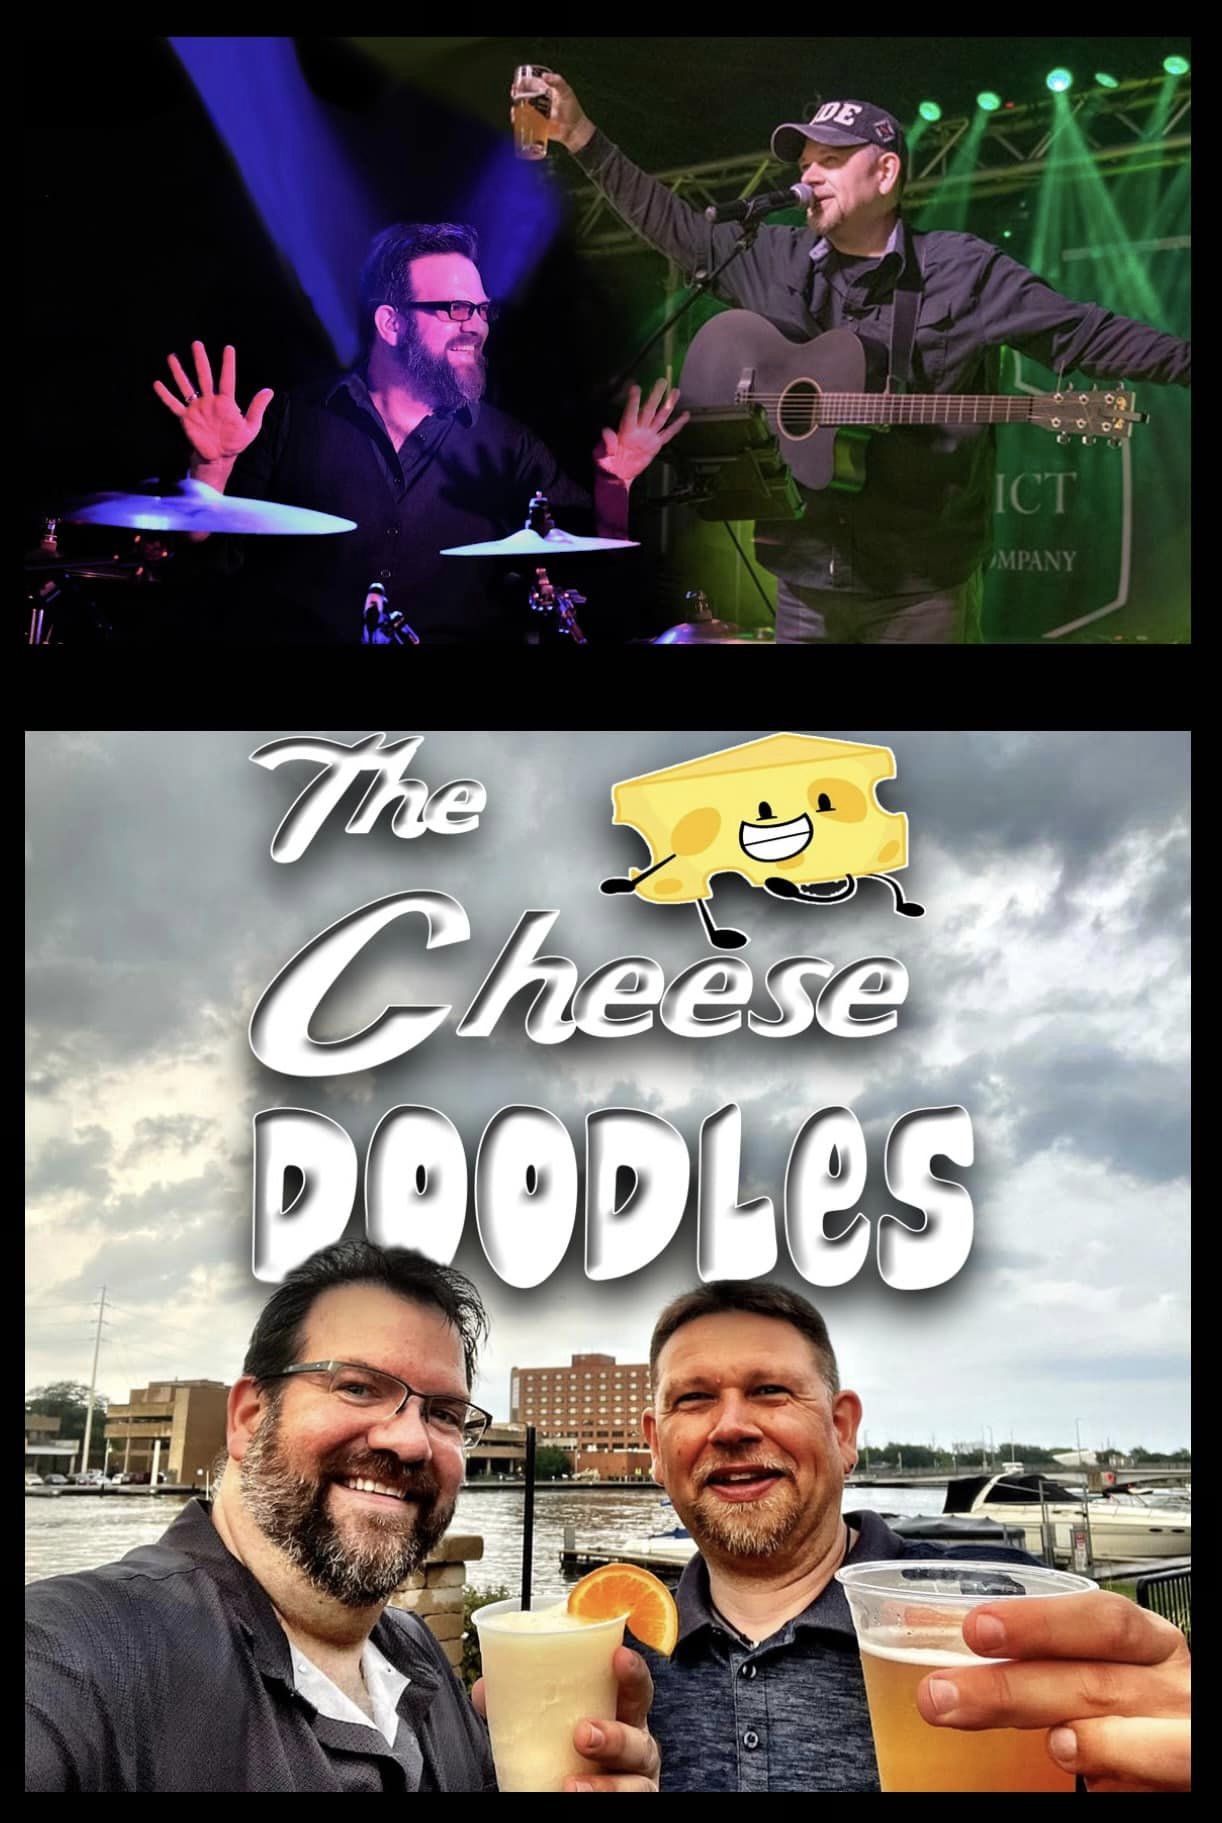 The Cheese Doodles WRTC